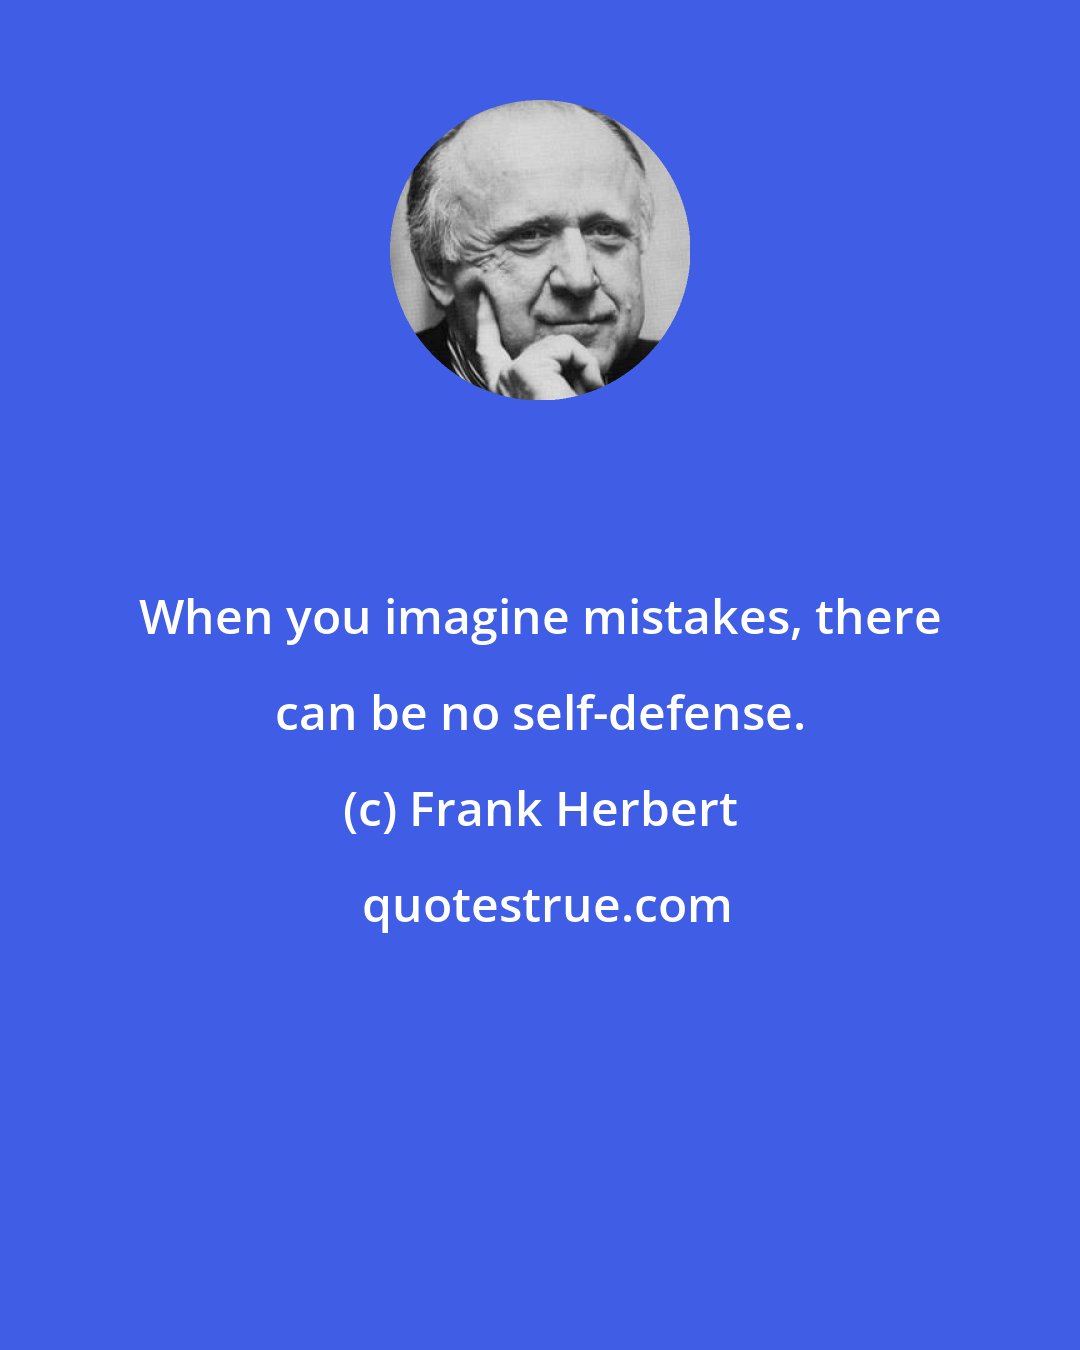 Frank Herbert: When you imagine mistakes, there can be no self-defense.